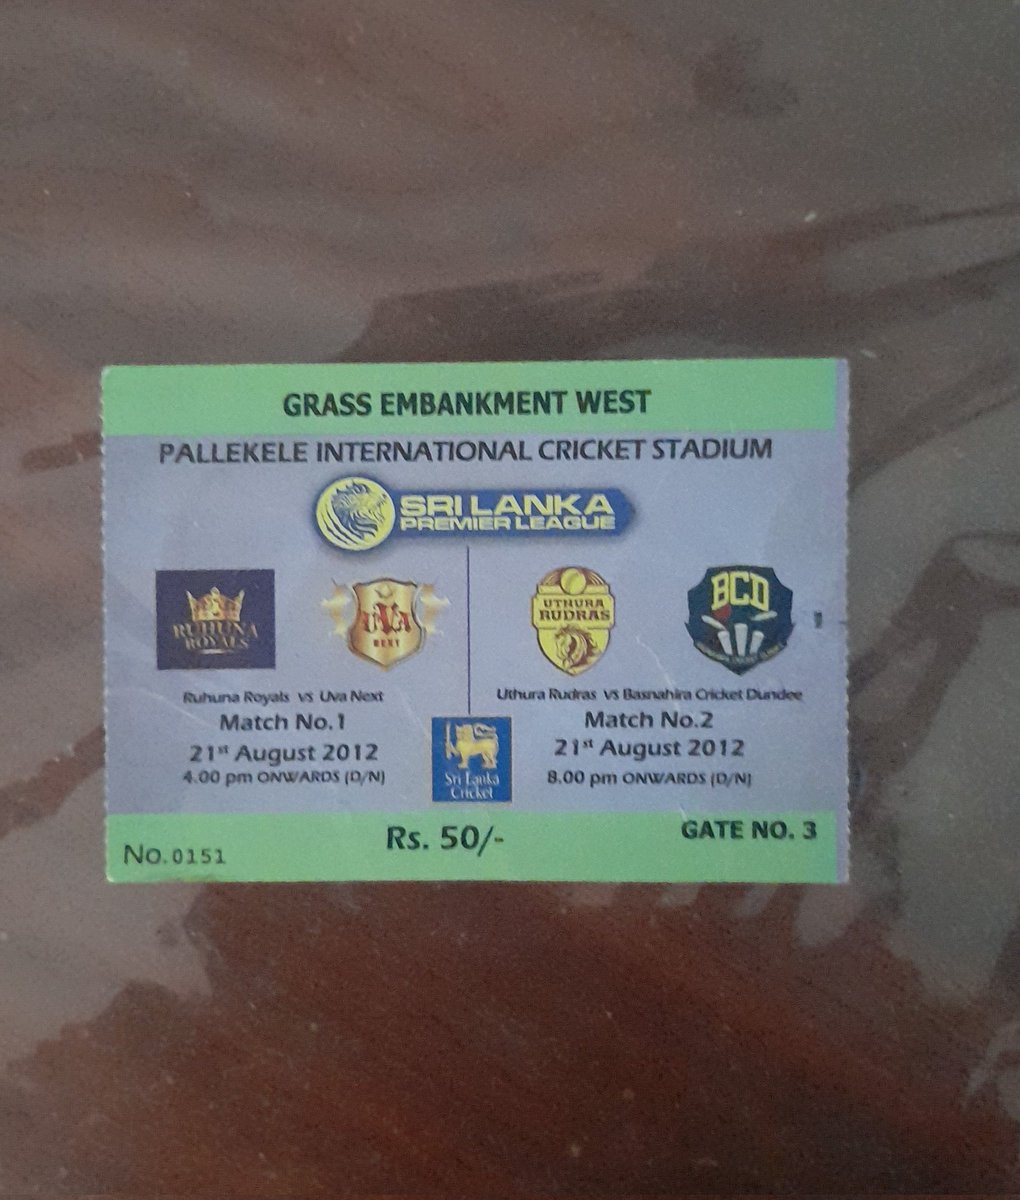 Found an OG league of @LPLT20 (SLPL) ticket which was in 2012 🕒  

Back then SLPL was a mess with Financial flaws and Administration issues in SLC 🚫

I'm glad about the success of the new 'Lanka Premier League' ✅️

#cricket #CricketTwitter #SriLanka 
#LPLT20 #LPL2023 #SLvAFG